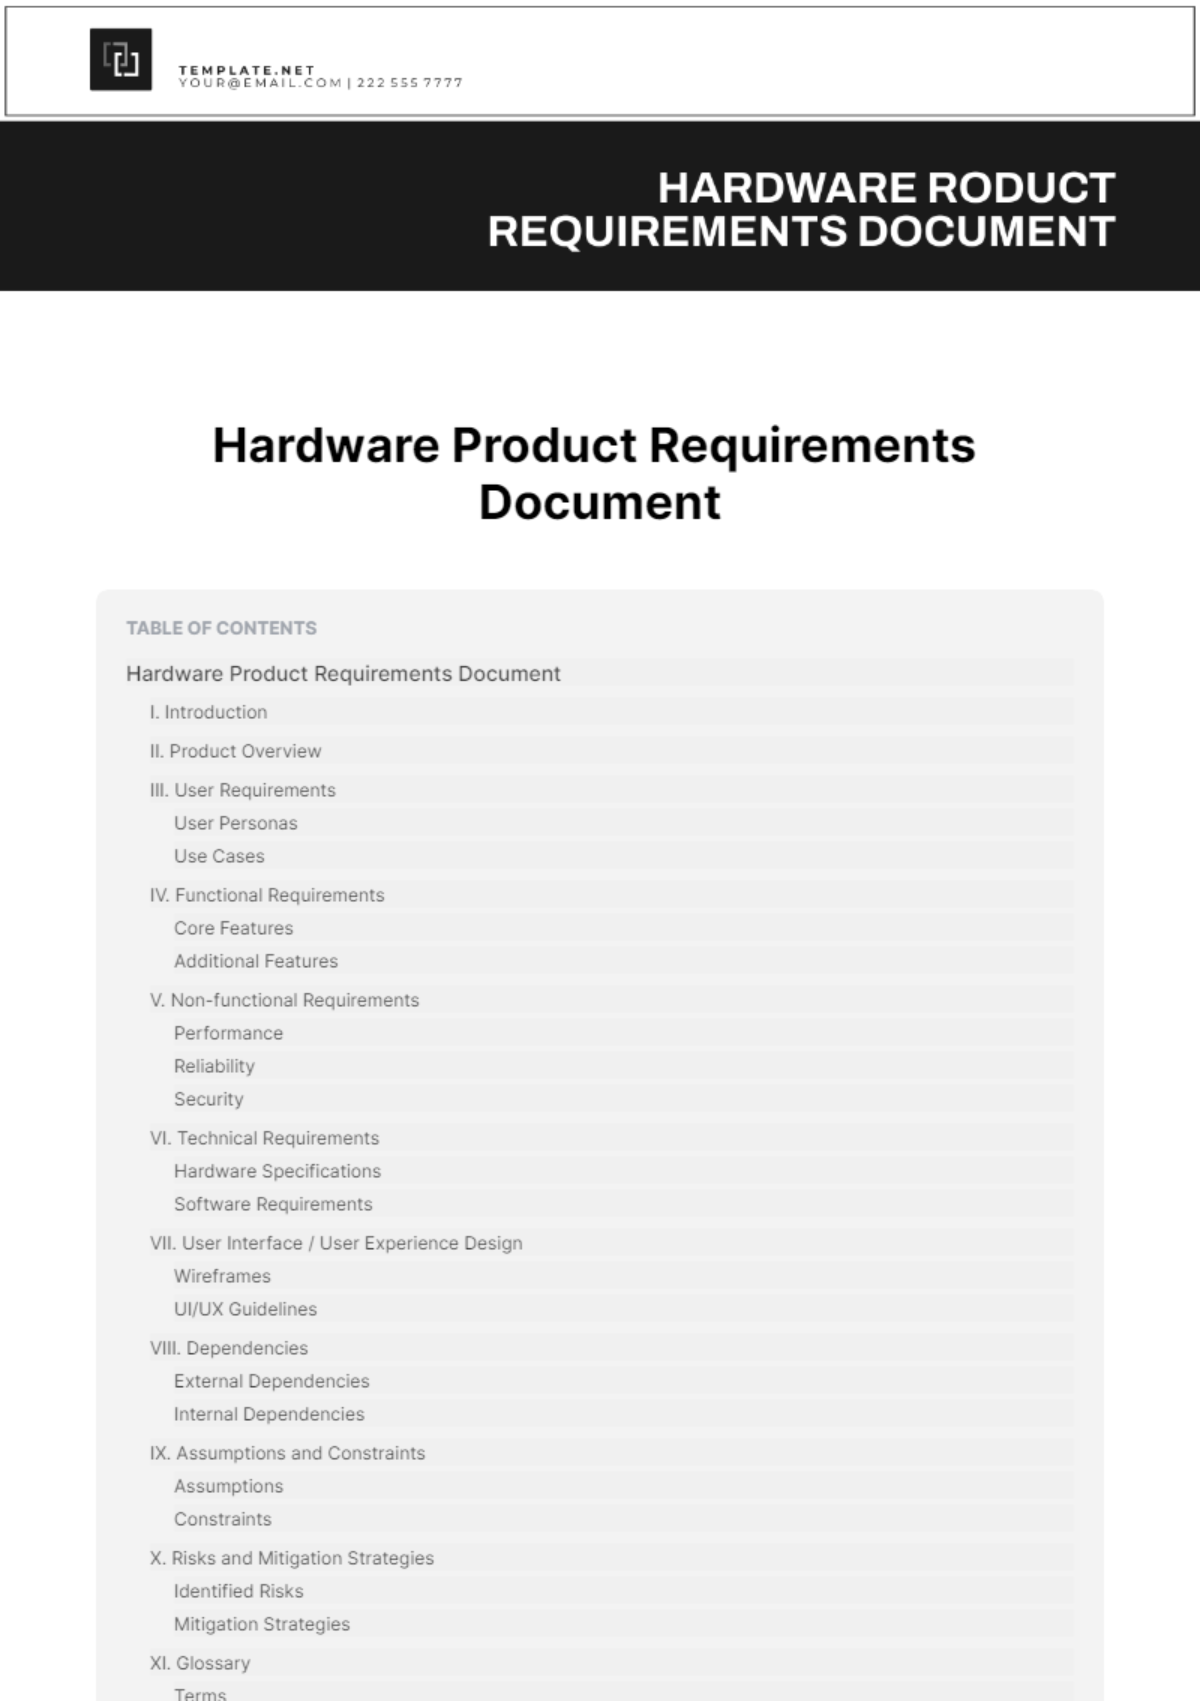 Hardware Product Requirements Document Template